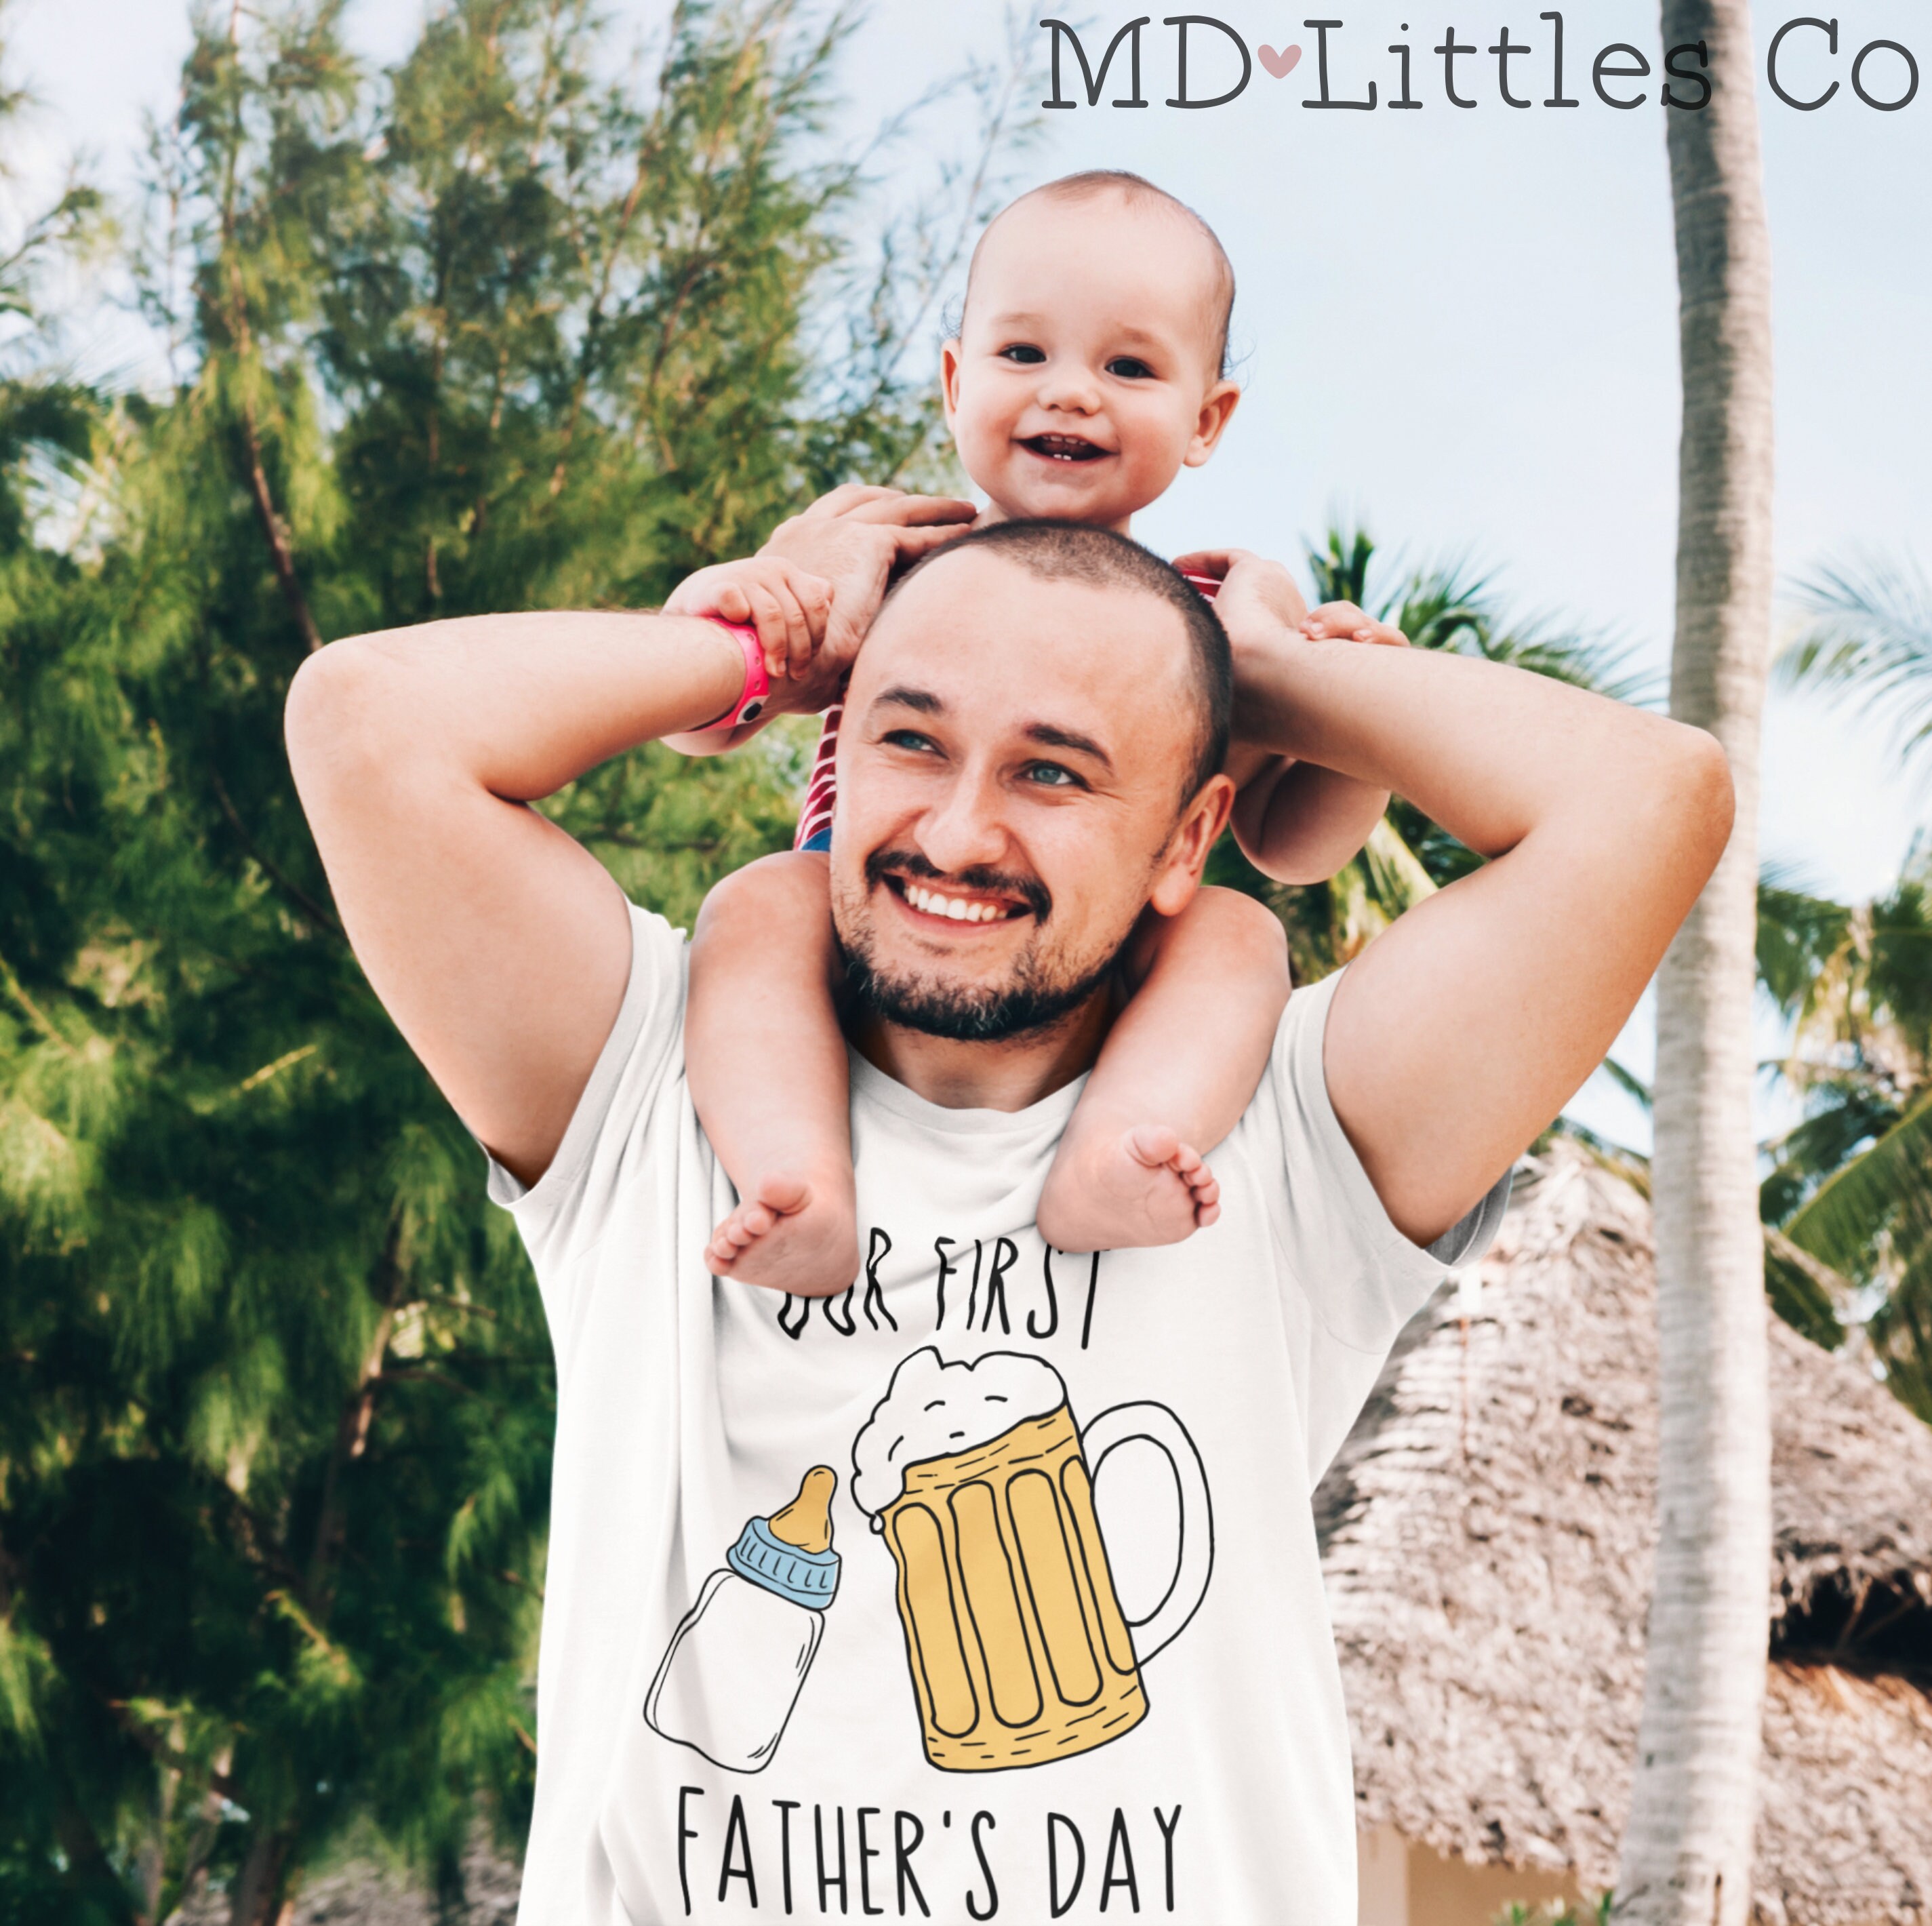 Matching Father's Day Shirt, Funny Our First Fathers Day Shirt